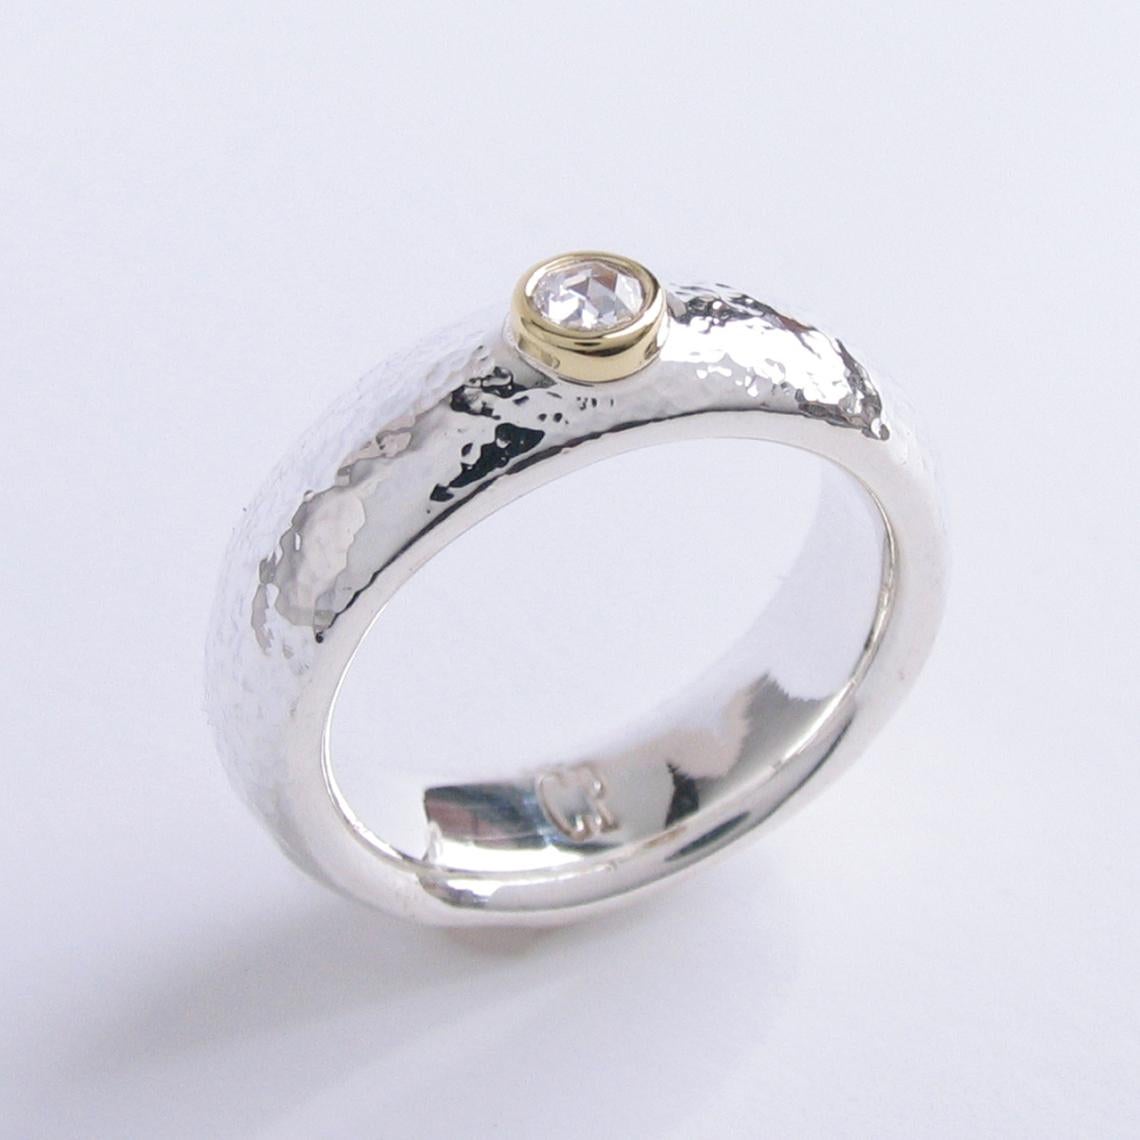 Contemporary White Rose Cut Diamond Ring In Sterling Silver & 18k Yellow Gold  